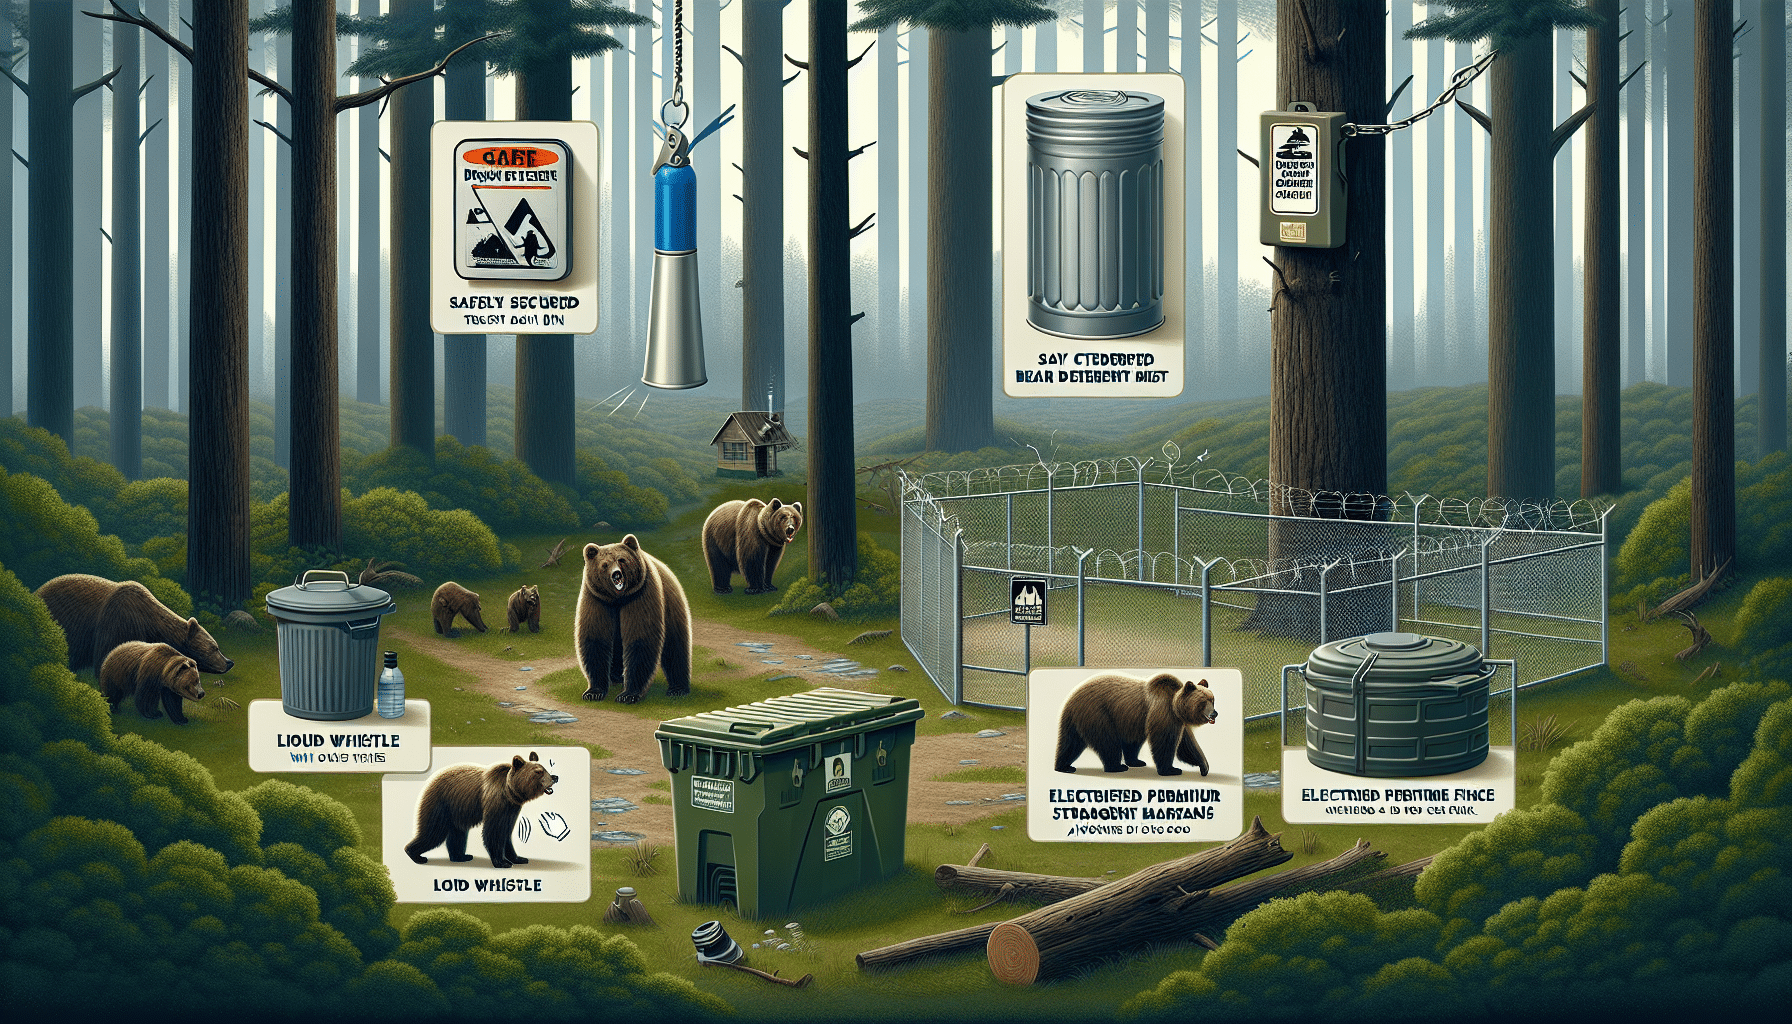 An educational visual about deterring brown bears without imposing harm. In a serene forest scene, several techniques are showcased: a safely secured trash bin with lock and lid, a spray canister of generic bear deterrent mist, a loud whistle hanging from a tree branch, electrified perimeter fence around the campsite and a bear-proof food storage container suspended between two trees. Everything is displayed in a clear way to allow viewers to understand their use and significance without any accompanying text or brand logos. There are no human figures or animals portrayed in the scene.